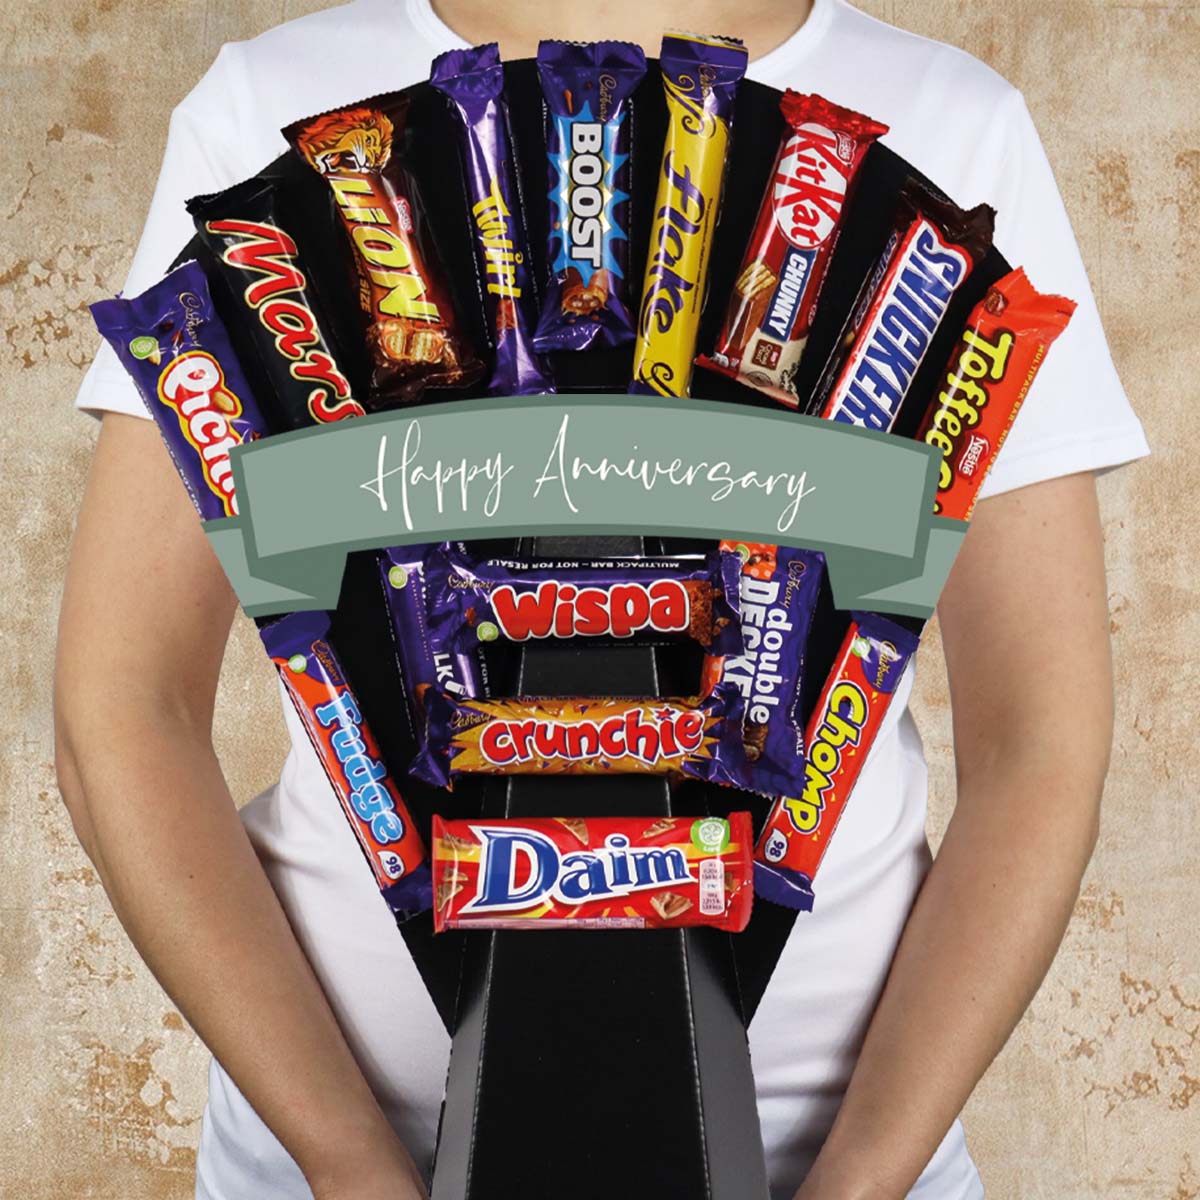 Mixed Variety Happy Anniversary Chocolate Bouquet - Perfect Anniversary Gift